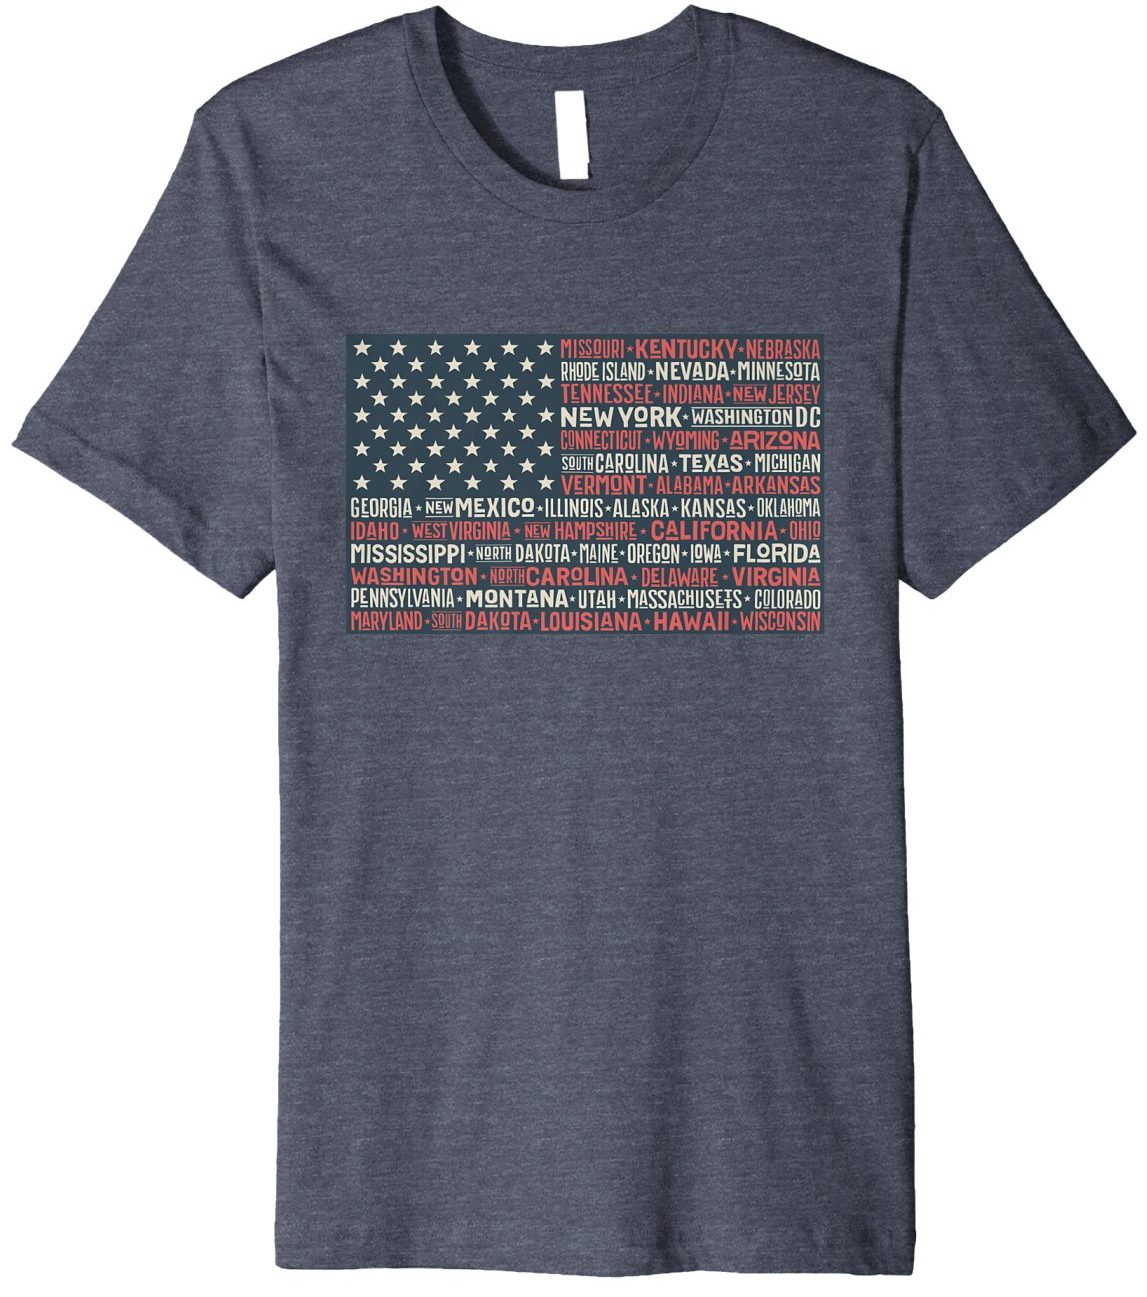 Funny Patriotic American T-Shirts 2018: American Flag with States Shirt for Fourth of July